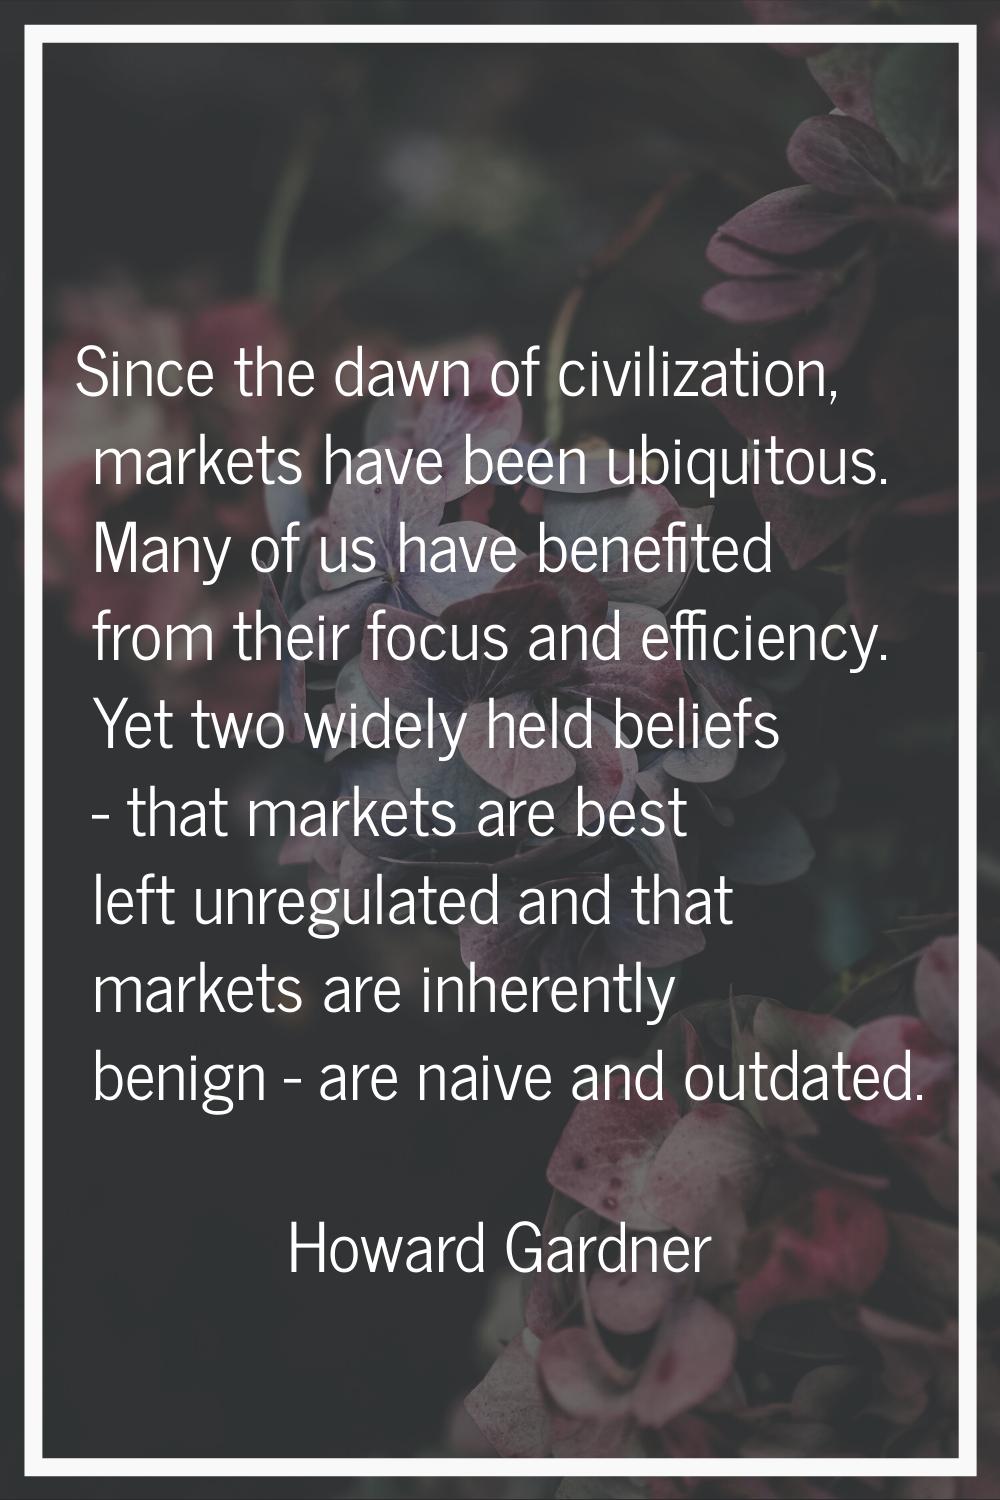 Since the dawn of civilization, markets have been ubiquitous. Many of us have benefited from their 